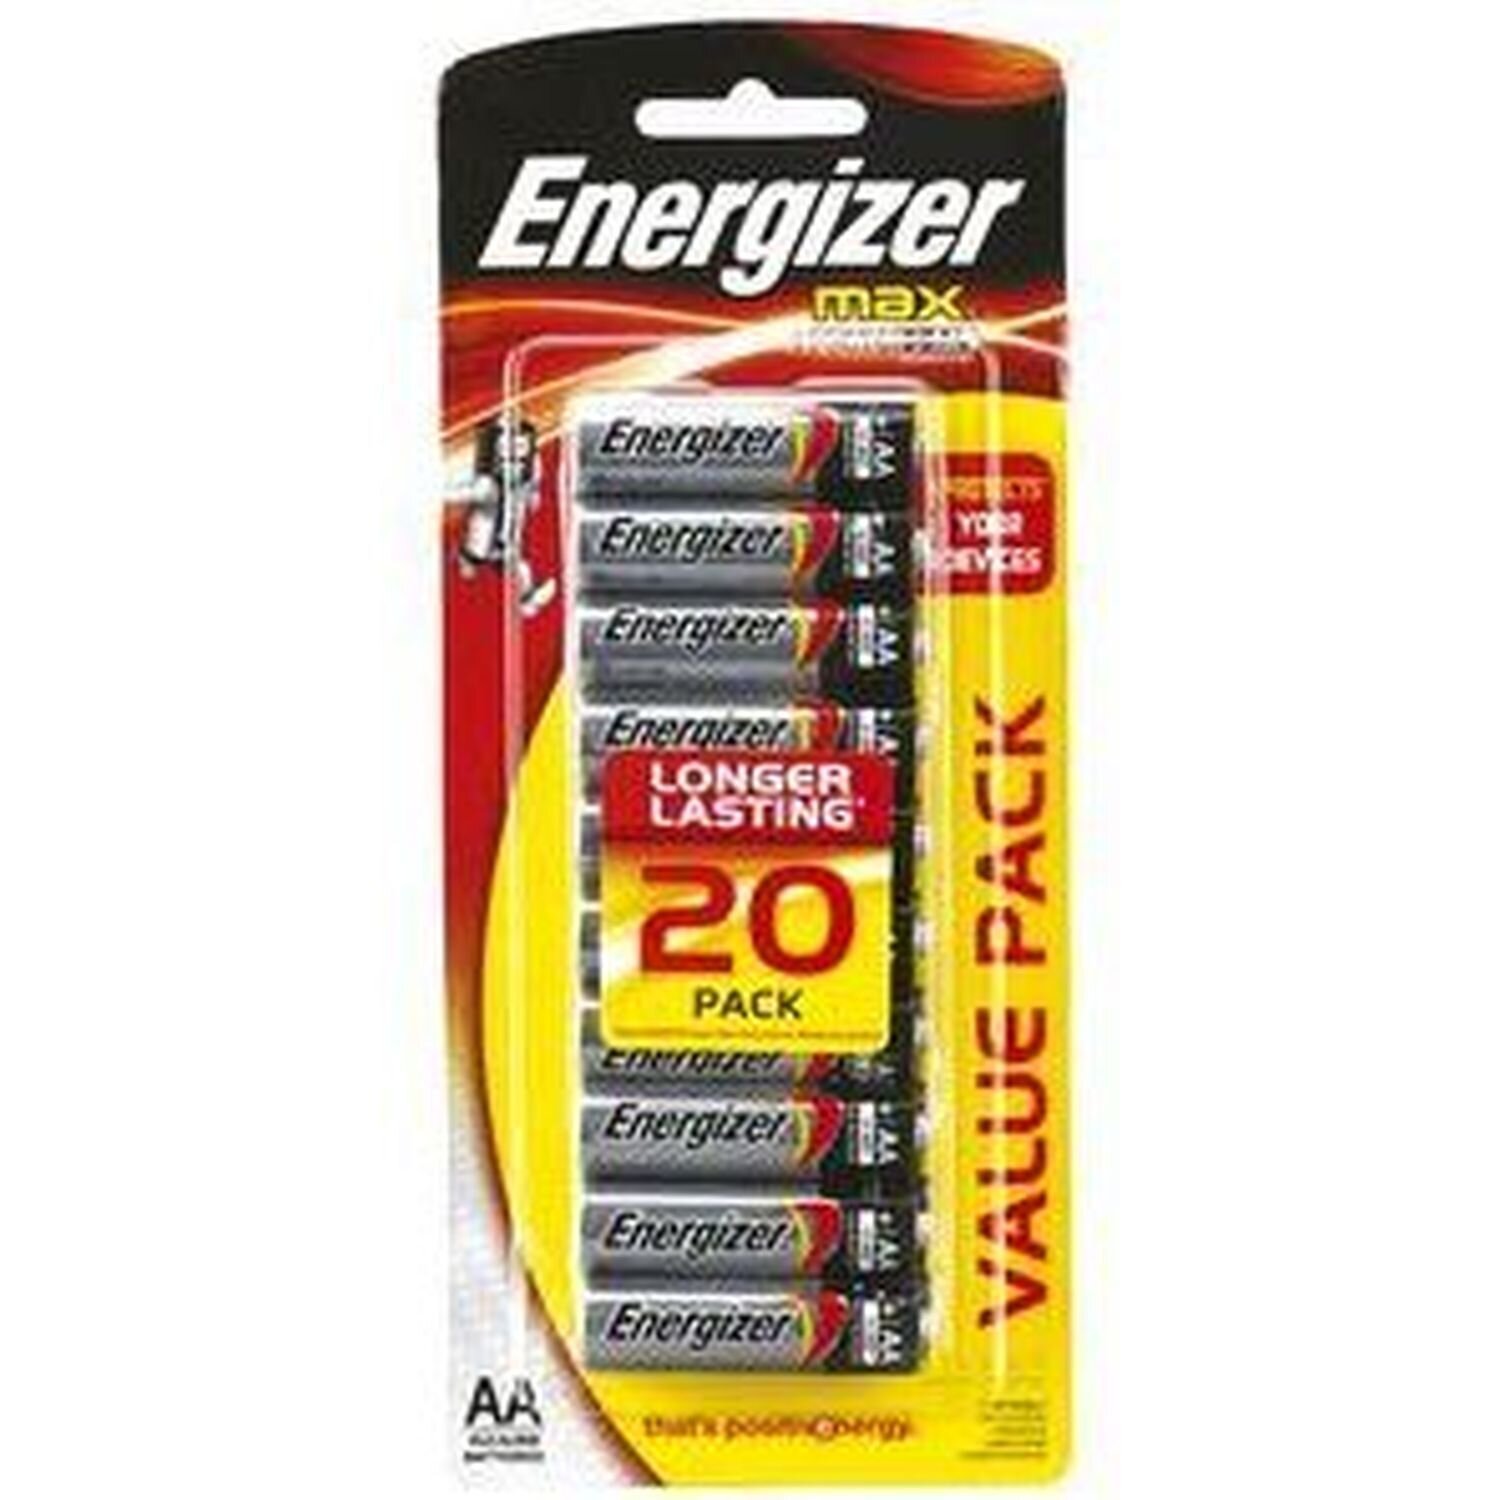 Energizer Max AA Battery Packet 20